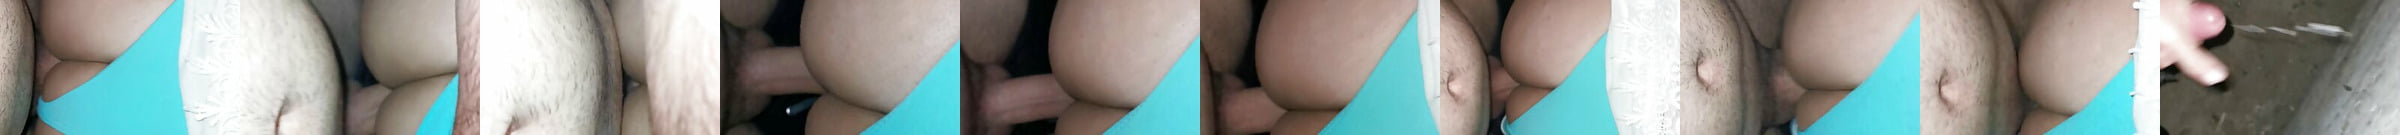 Internal Deep Creampie For The Amateur Real Hotwife Xhamster